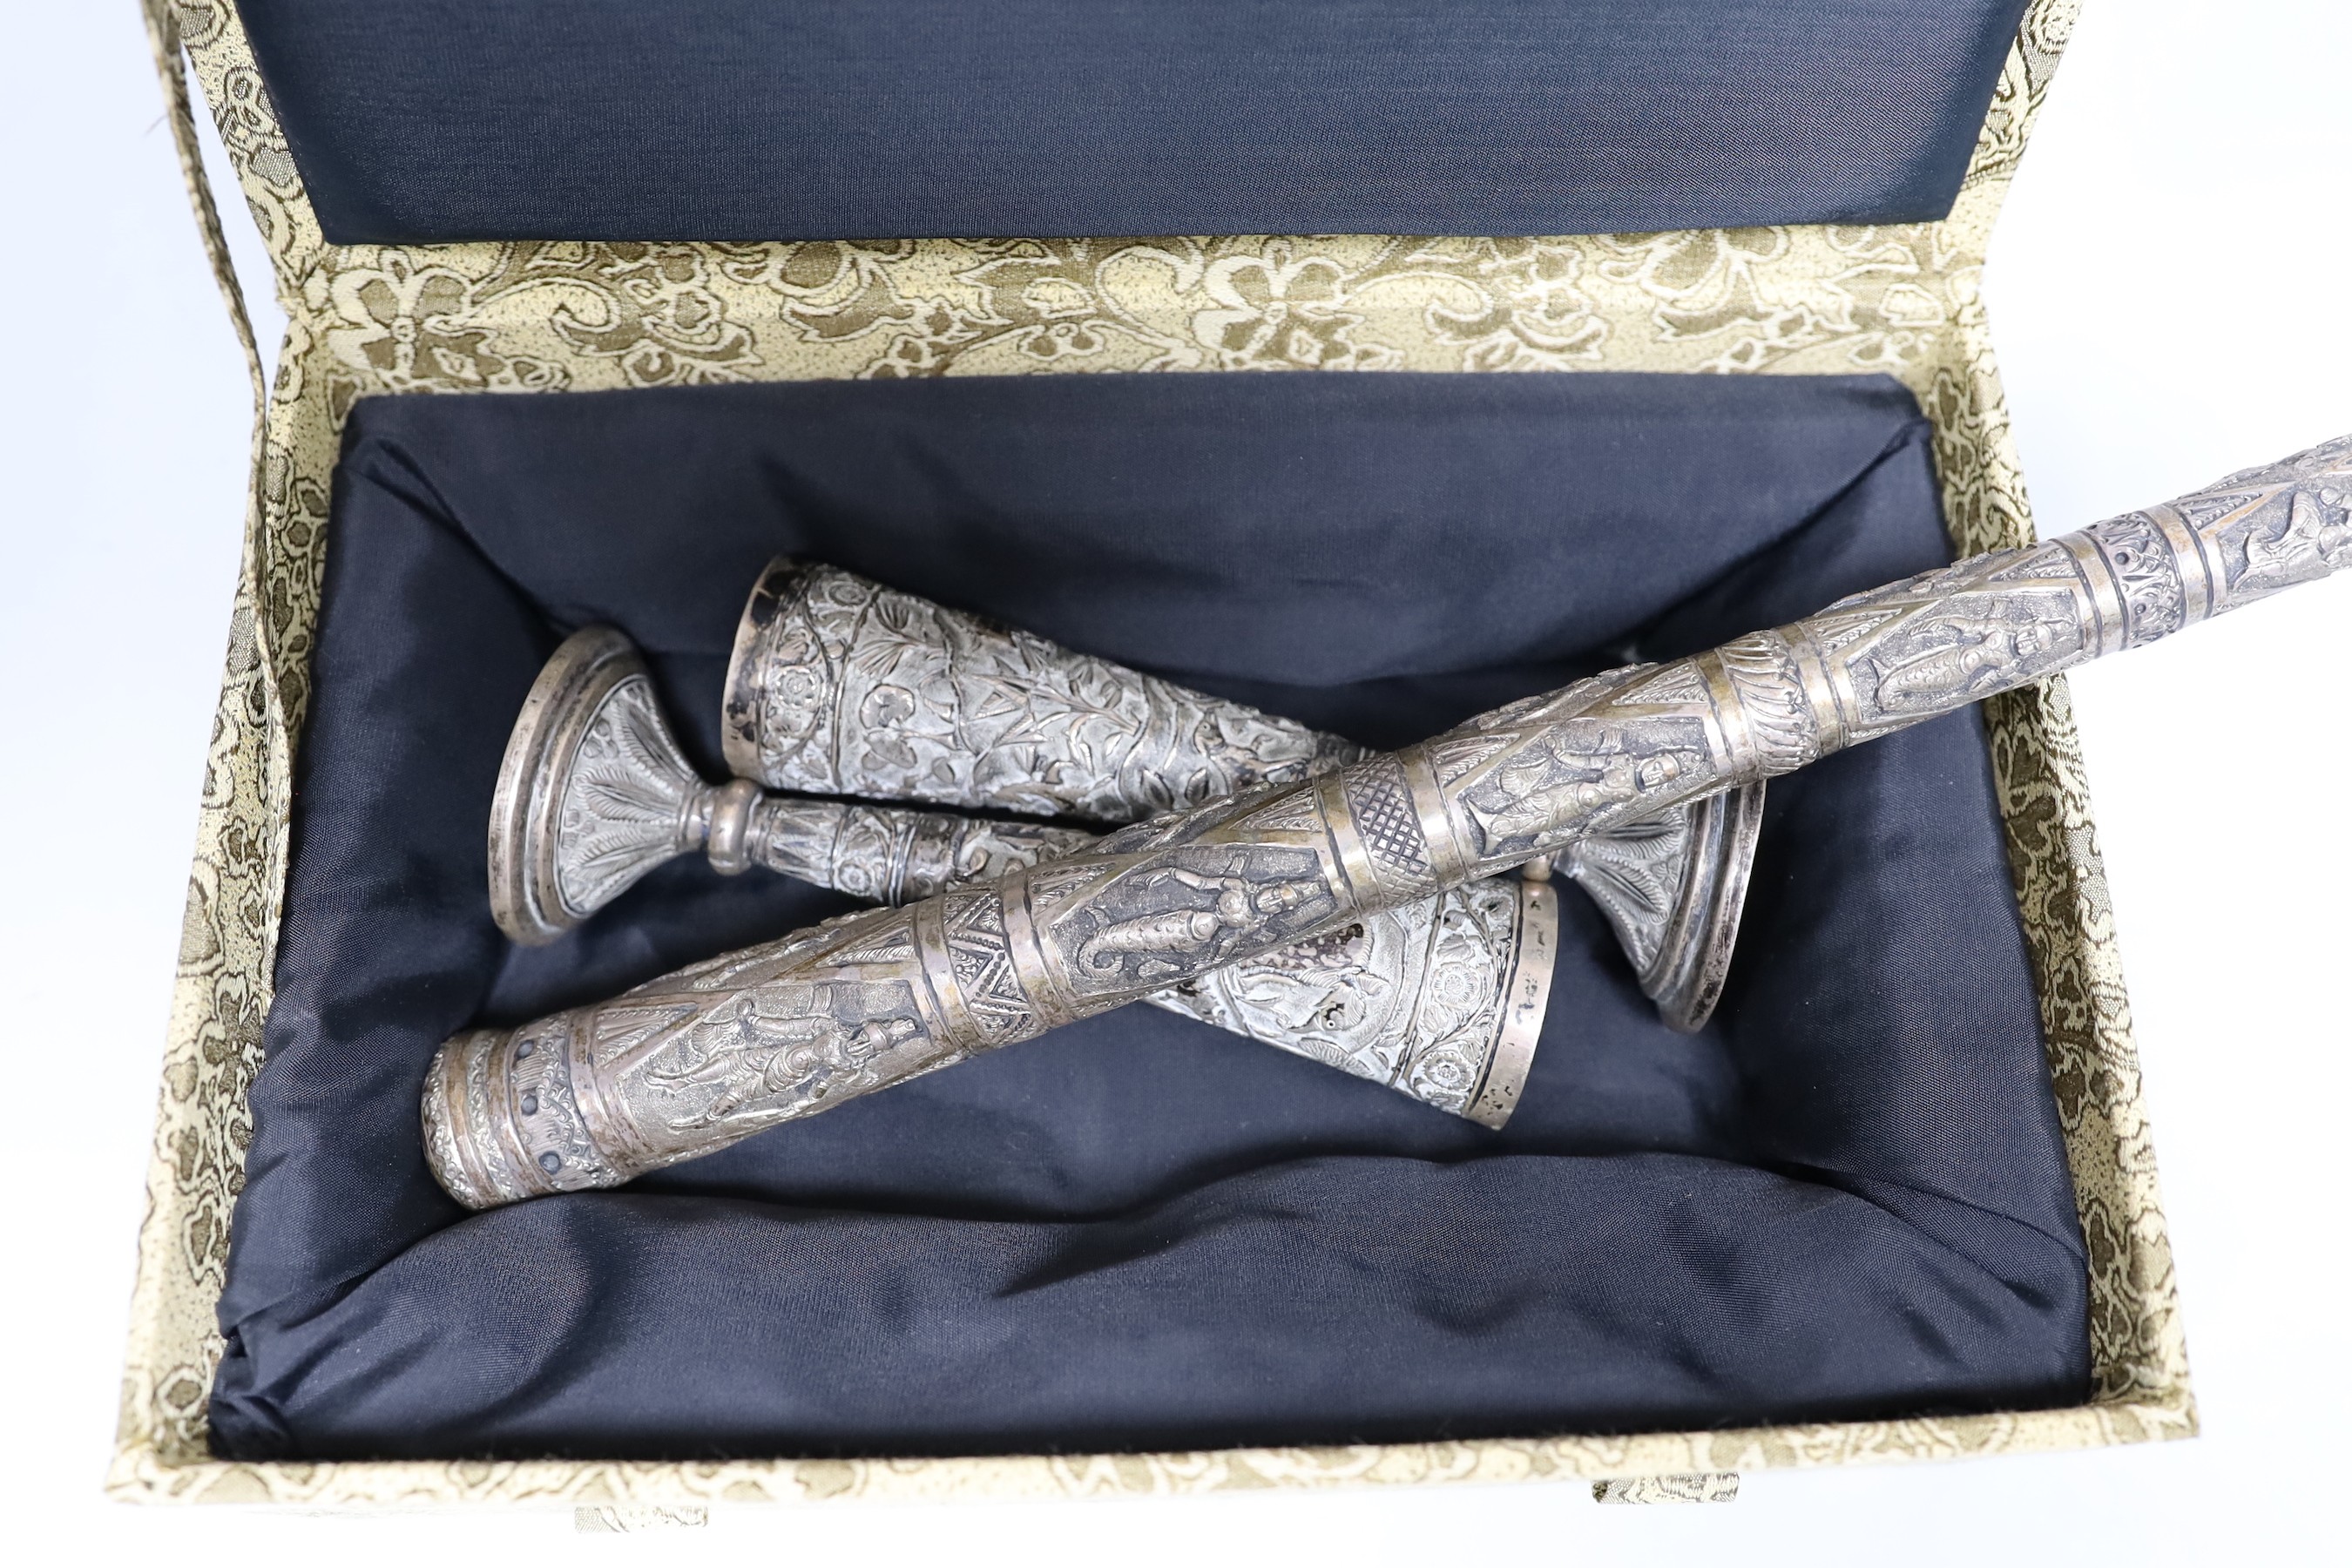 A Burmese white metal parasol handle, 33.2cm, a pair of Indian white metal spill vases and a pair of filigree dishes.